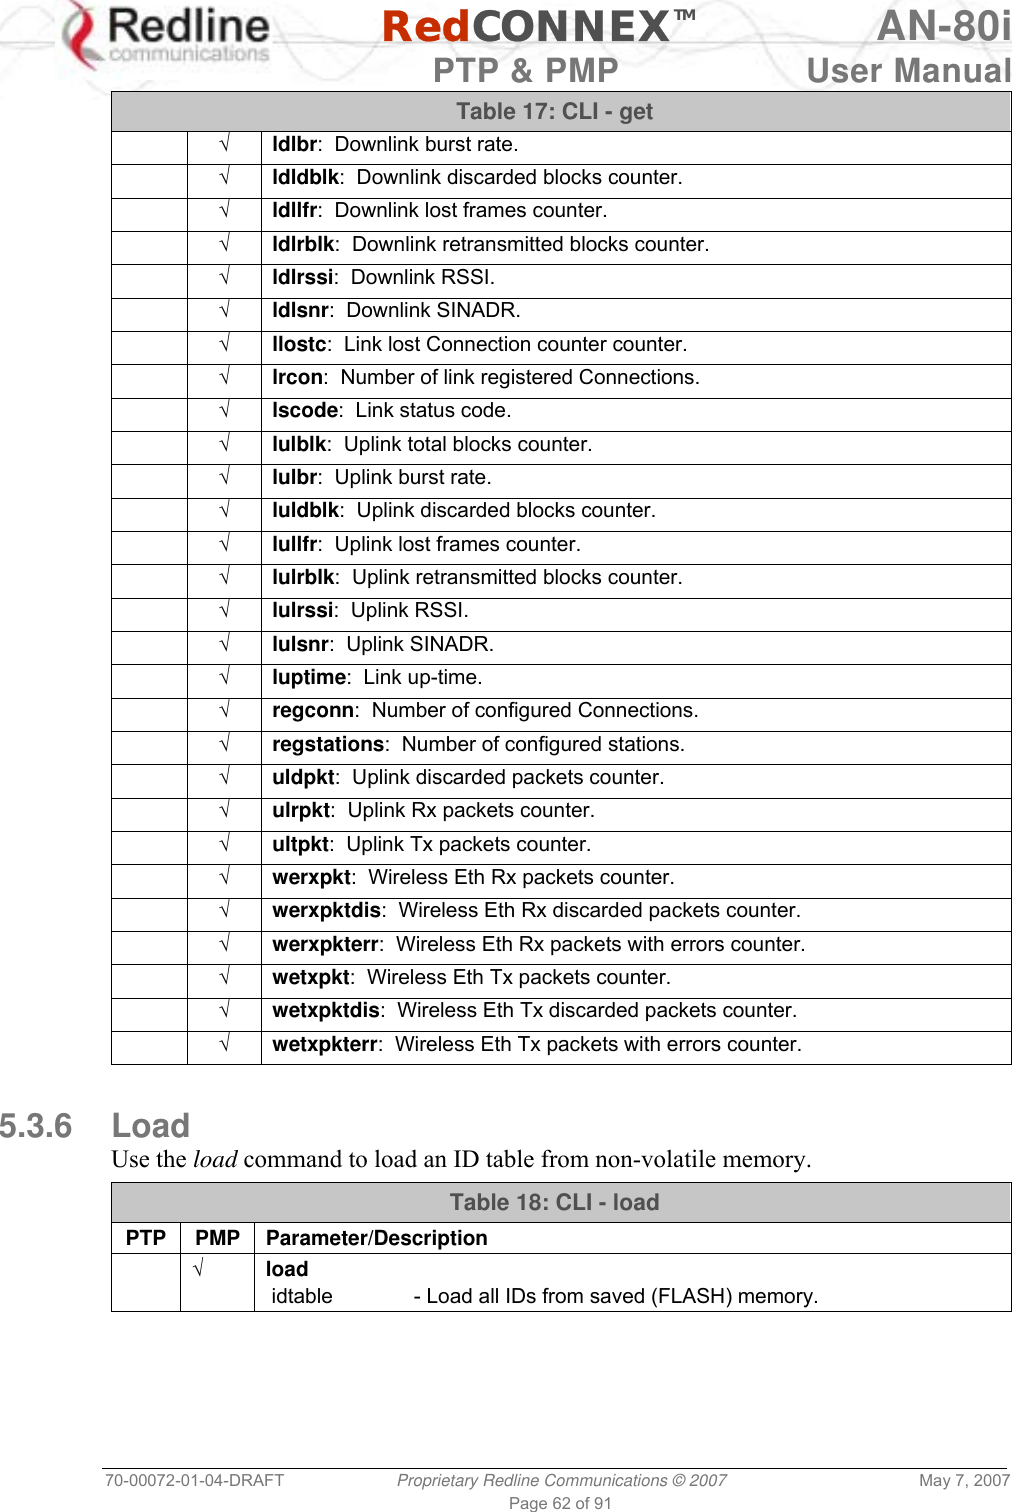   RedCONNEXTM AN-80i   PTP &amp; PMP  User Manual 70-00072-01-04-DRAFT  Proprietary Redline Communications © 2007  May 7, 2007 Page 62 of 91 Table 17: CLI - get  √ ldlbr:  Downlink burst rate.  √ ldldblk:  Downlink discarded blocks counter.  √ ldllfr:  Downlink lost frames counter.  √ ldlrblk:  Downlink retransmitted blocks counter.  √ ldlrssi:  Downlink RSSI.  √ ldlsnr:  Downlink SINADR.  √ llostc:  Link lost Connection counter counter.  √ lrcon:  Number of link registered Connections.  √ lscode:  Link status code.  √ lulblk:  Uplink total blocks counter.  √ lulbr:  Uplink burst rate.  √ luldblk:  Uplink discarded blocks counter.  √ lullfr:  Uplink lost frames counter.  √ lulrblk:  Uplink retransmitted blocks counter.  √ lulrssi:  Uplink RSSI.  √ lulsnr:  Uplink SINADR.  √ luptime:  Link up-time.  √ regconn:  Number of configured Connections.  √ regstations:  Number of configured stations.  √ uldpkt:  Uplink discarded packets counter.  √ ulrpkt:  Uplink Rx packets counter.  √ ultpkt:  Uplink Tx packets counter.  √ werxpkt:  Wireless Eth Rx packets counter.  √ werxpktdis:  Wireless Eth Rx discarded packets counter.  √ werxpkterr:  Wireless Eth Rx packets with errors counter.  √ wetxpkt:  Wireless Eth Tx packets counter.  √ wetxpktdis:  Wireless Eth Tx discarded packets counter.  √ wetxpkterr:  Wireless Eth Tx packets with errors counter.  5.3.6 Load Use the load command to load an ID table from non-volatile memory. Table 18: CLI - load PTP PMP Parameter/Description  √ load  idtable              - Load all IDs from saved (FLASH) memory.  